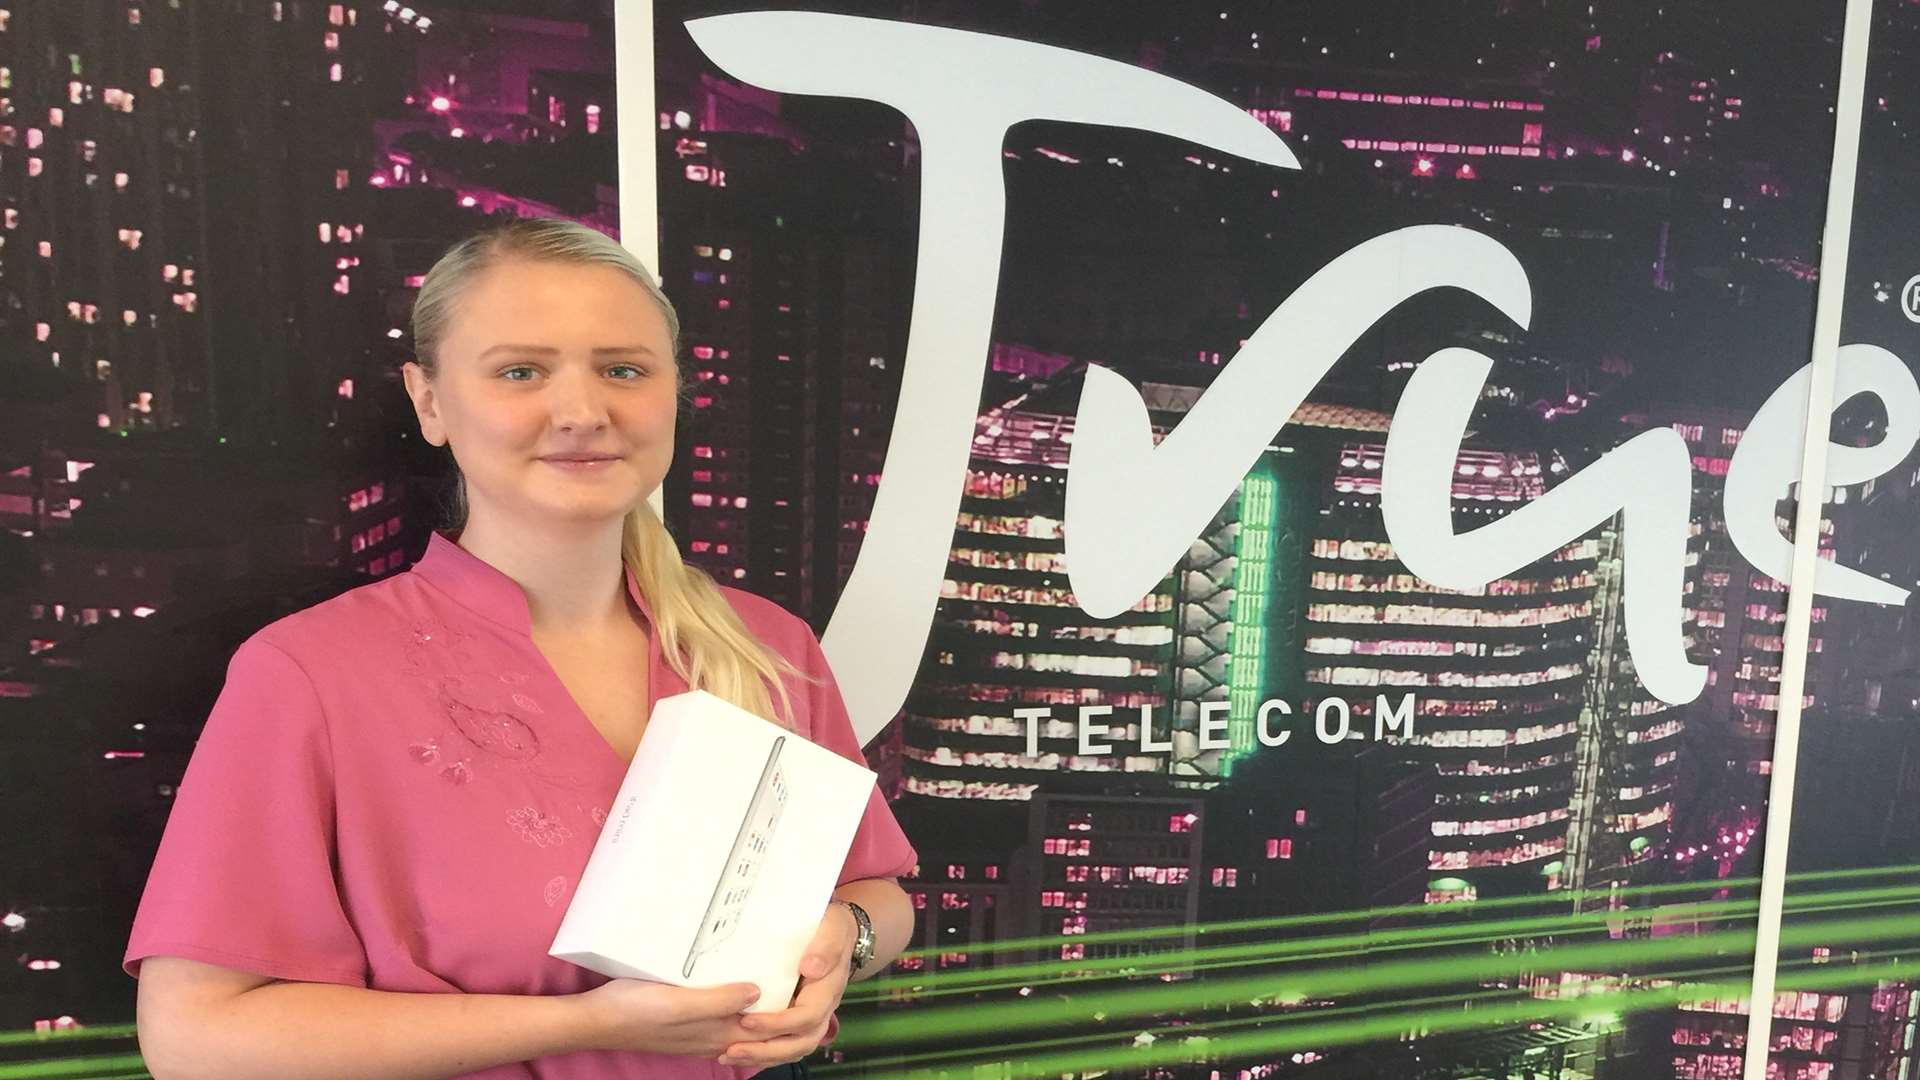 Fern Hugill from True Telecom with the iPad mini 2 that will go to the biggest individual fundraiser at the KM Assault Course Challenge on October 3.